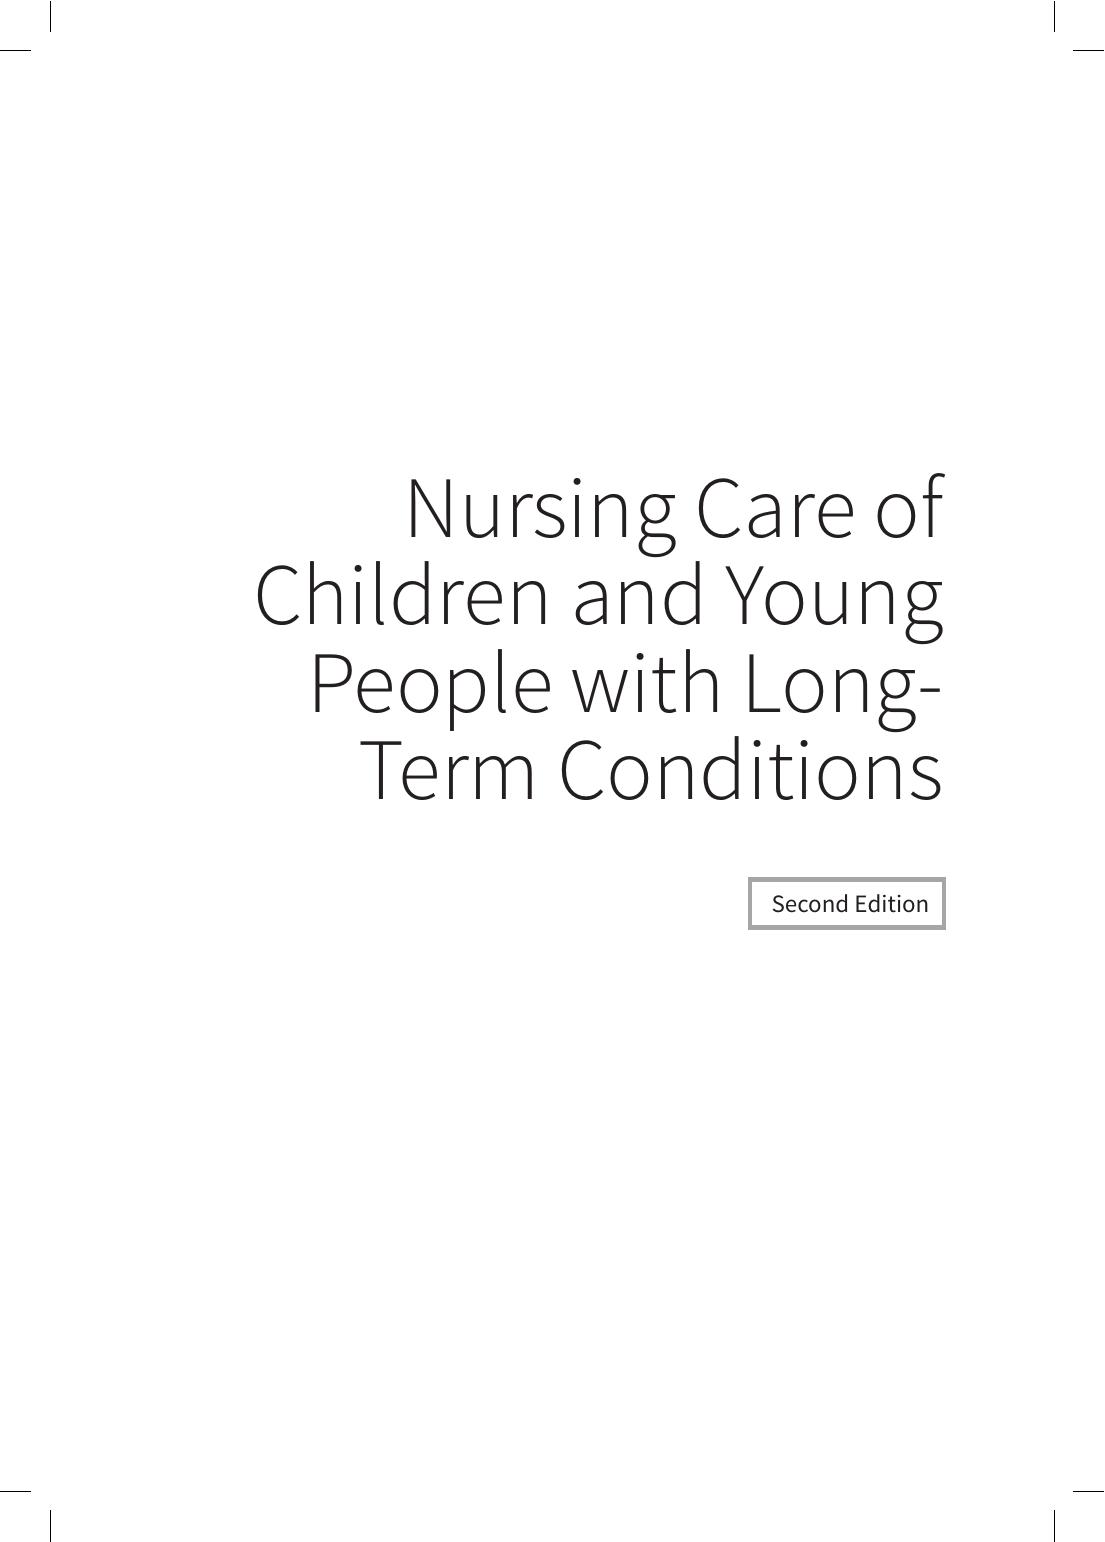 Nursing Care of Children and Young People with Long-Term Conditions(2021)